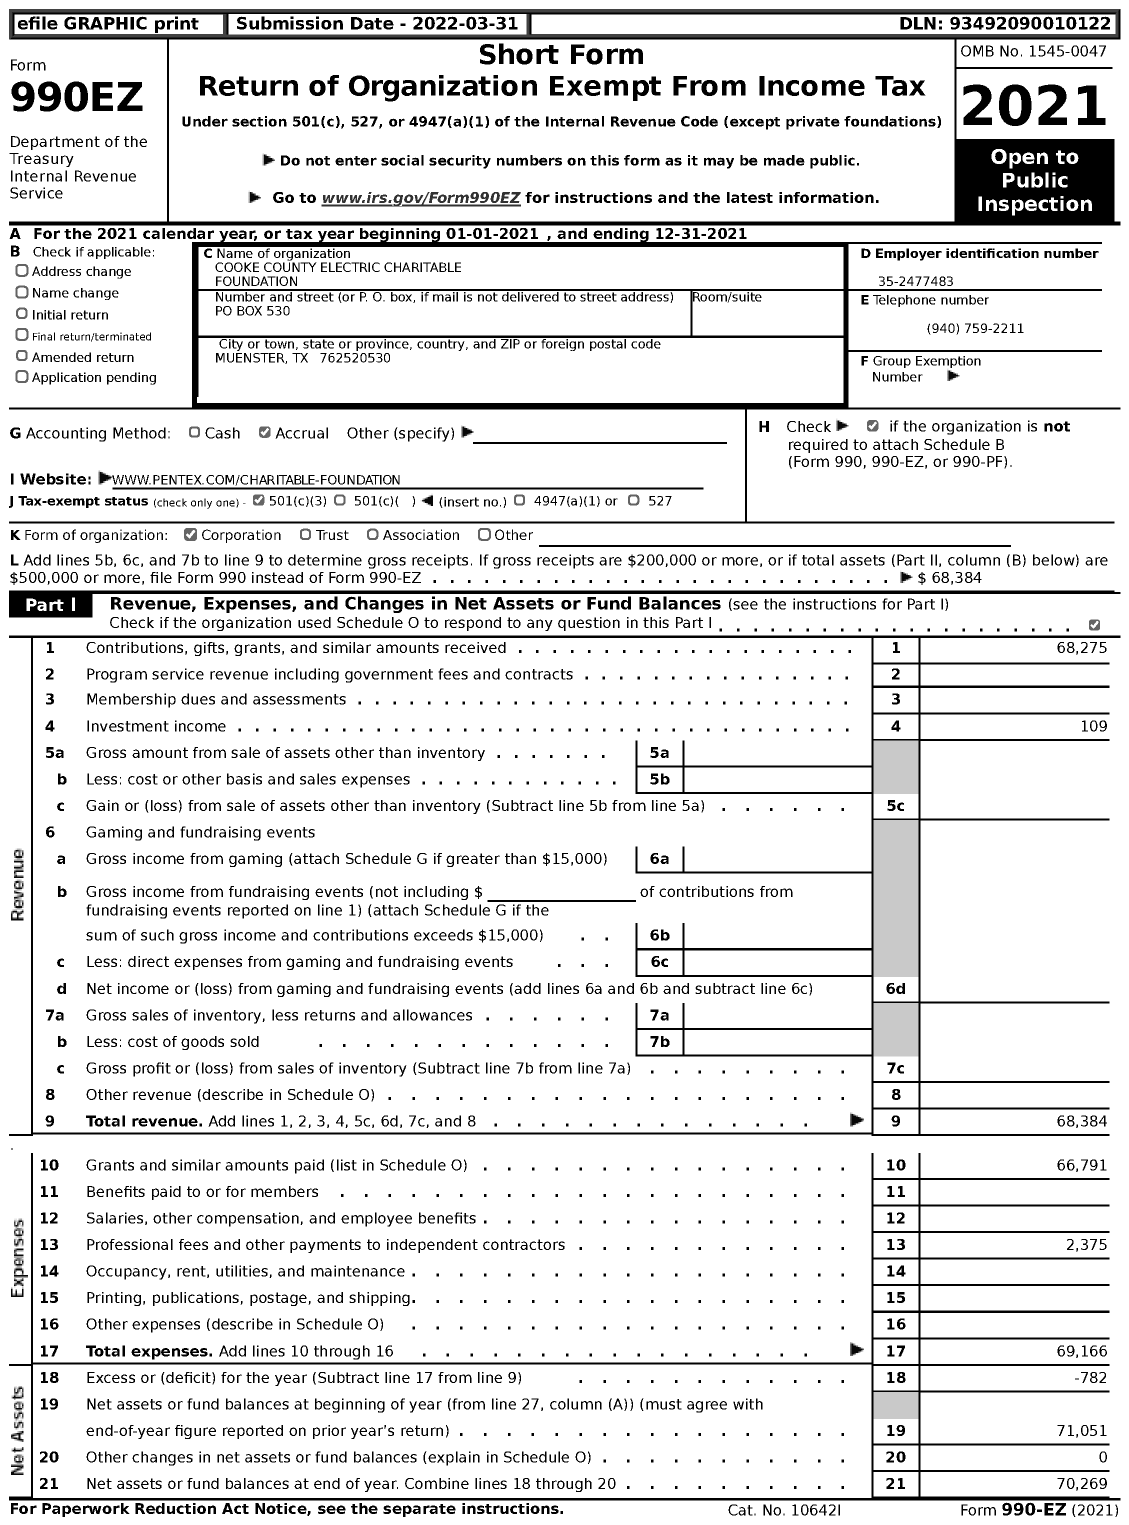 Image of first page of 2021 Form 990EZ for Cooke County Electric Charitable Foundation